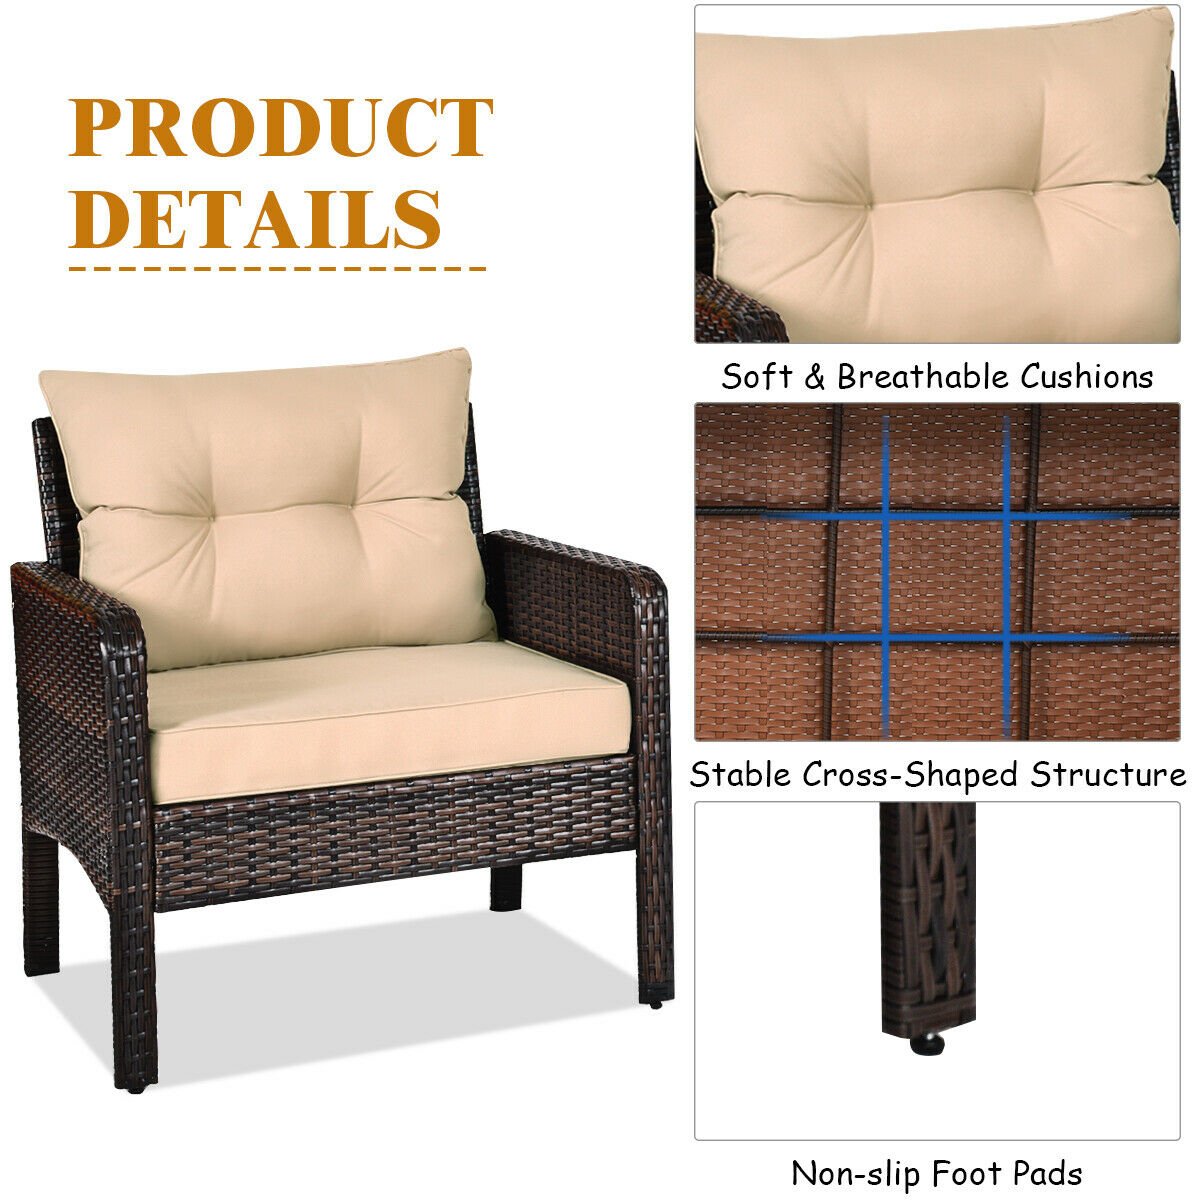 3 Pieces Outdoor Patio Rattan Conversation Set with Seat Cushions, Beige - Gallery Canada